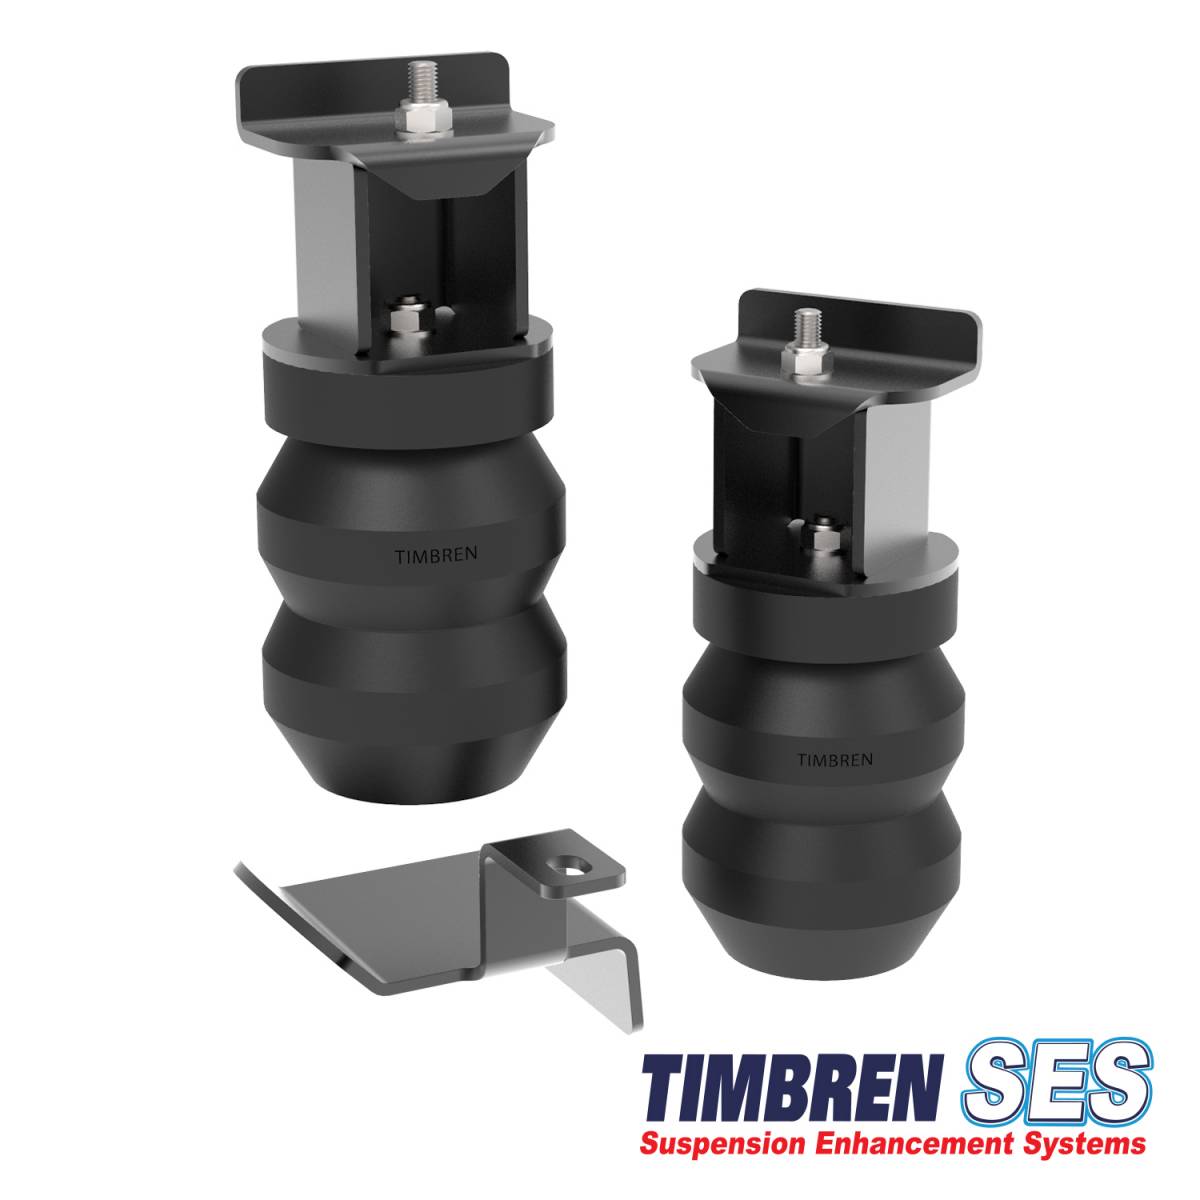 Timbren 2007-2014 FORD F-450 F-550 SUPER DUTY CAB & CHASSIS ALL MODELS SES Suspension Enhancement System Rear Kit FRSDD